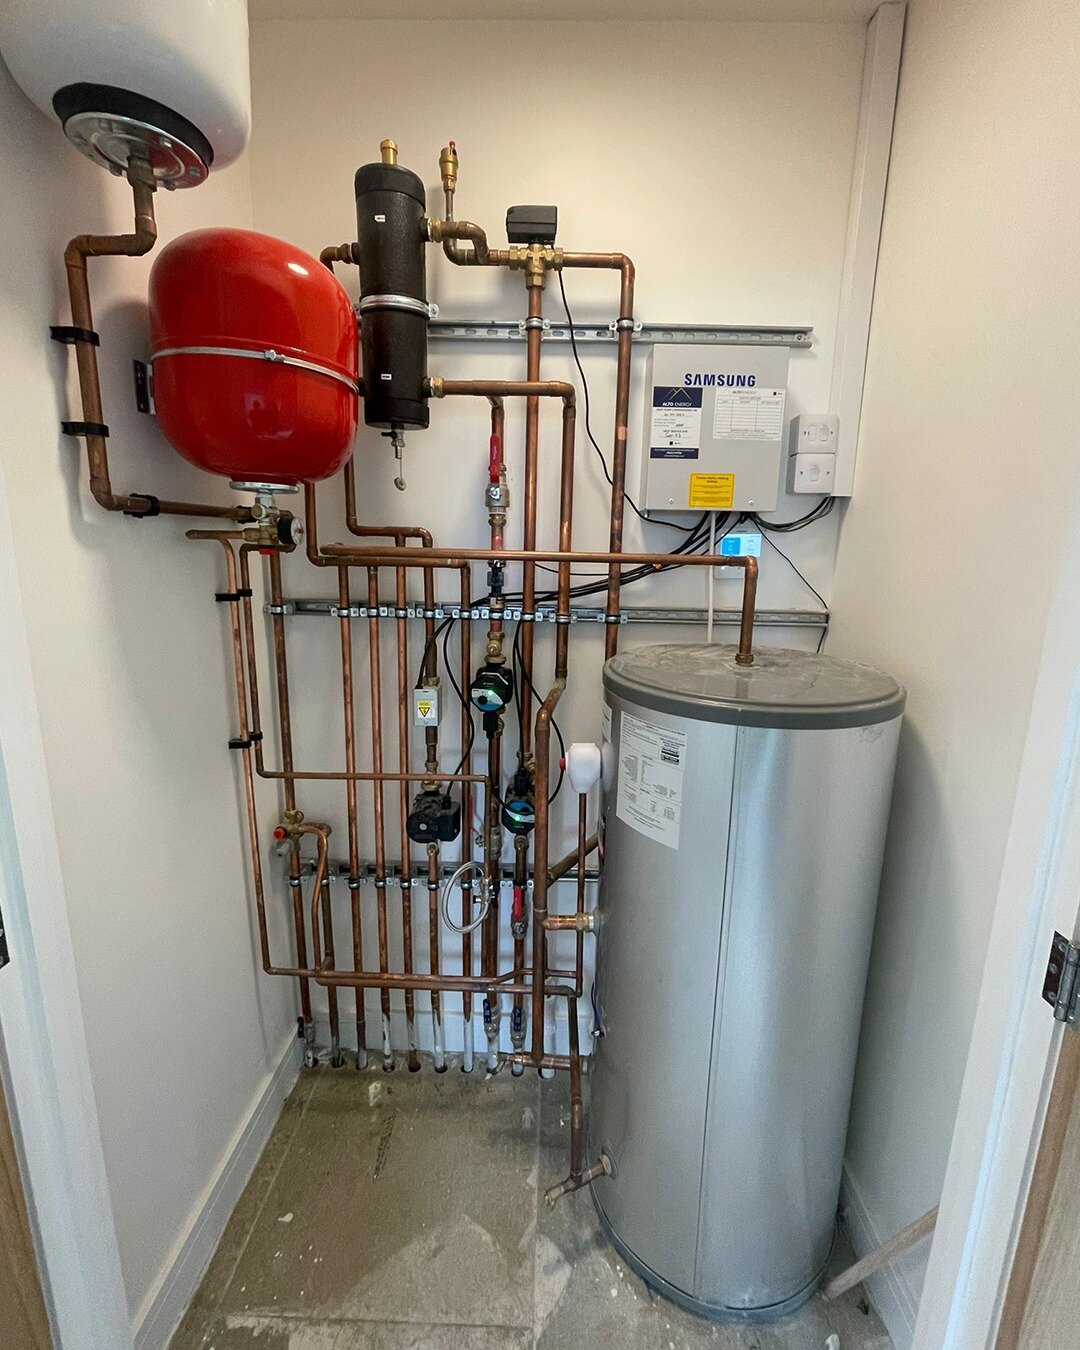 🥳 Another new build fitted with an air source heat pump and underfloor heating. Pipework all nice and tidy too, so we're happy! It's been a breeze working with the developer, JWS Cotswold Builders and the installers, South West Plumbing and Heating.